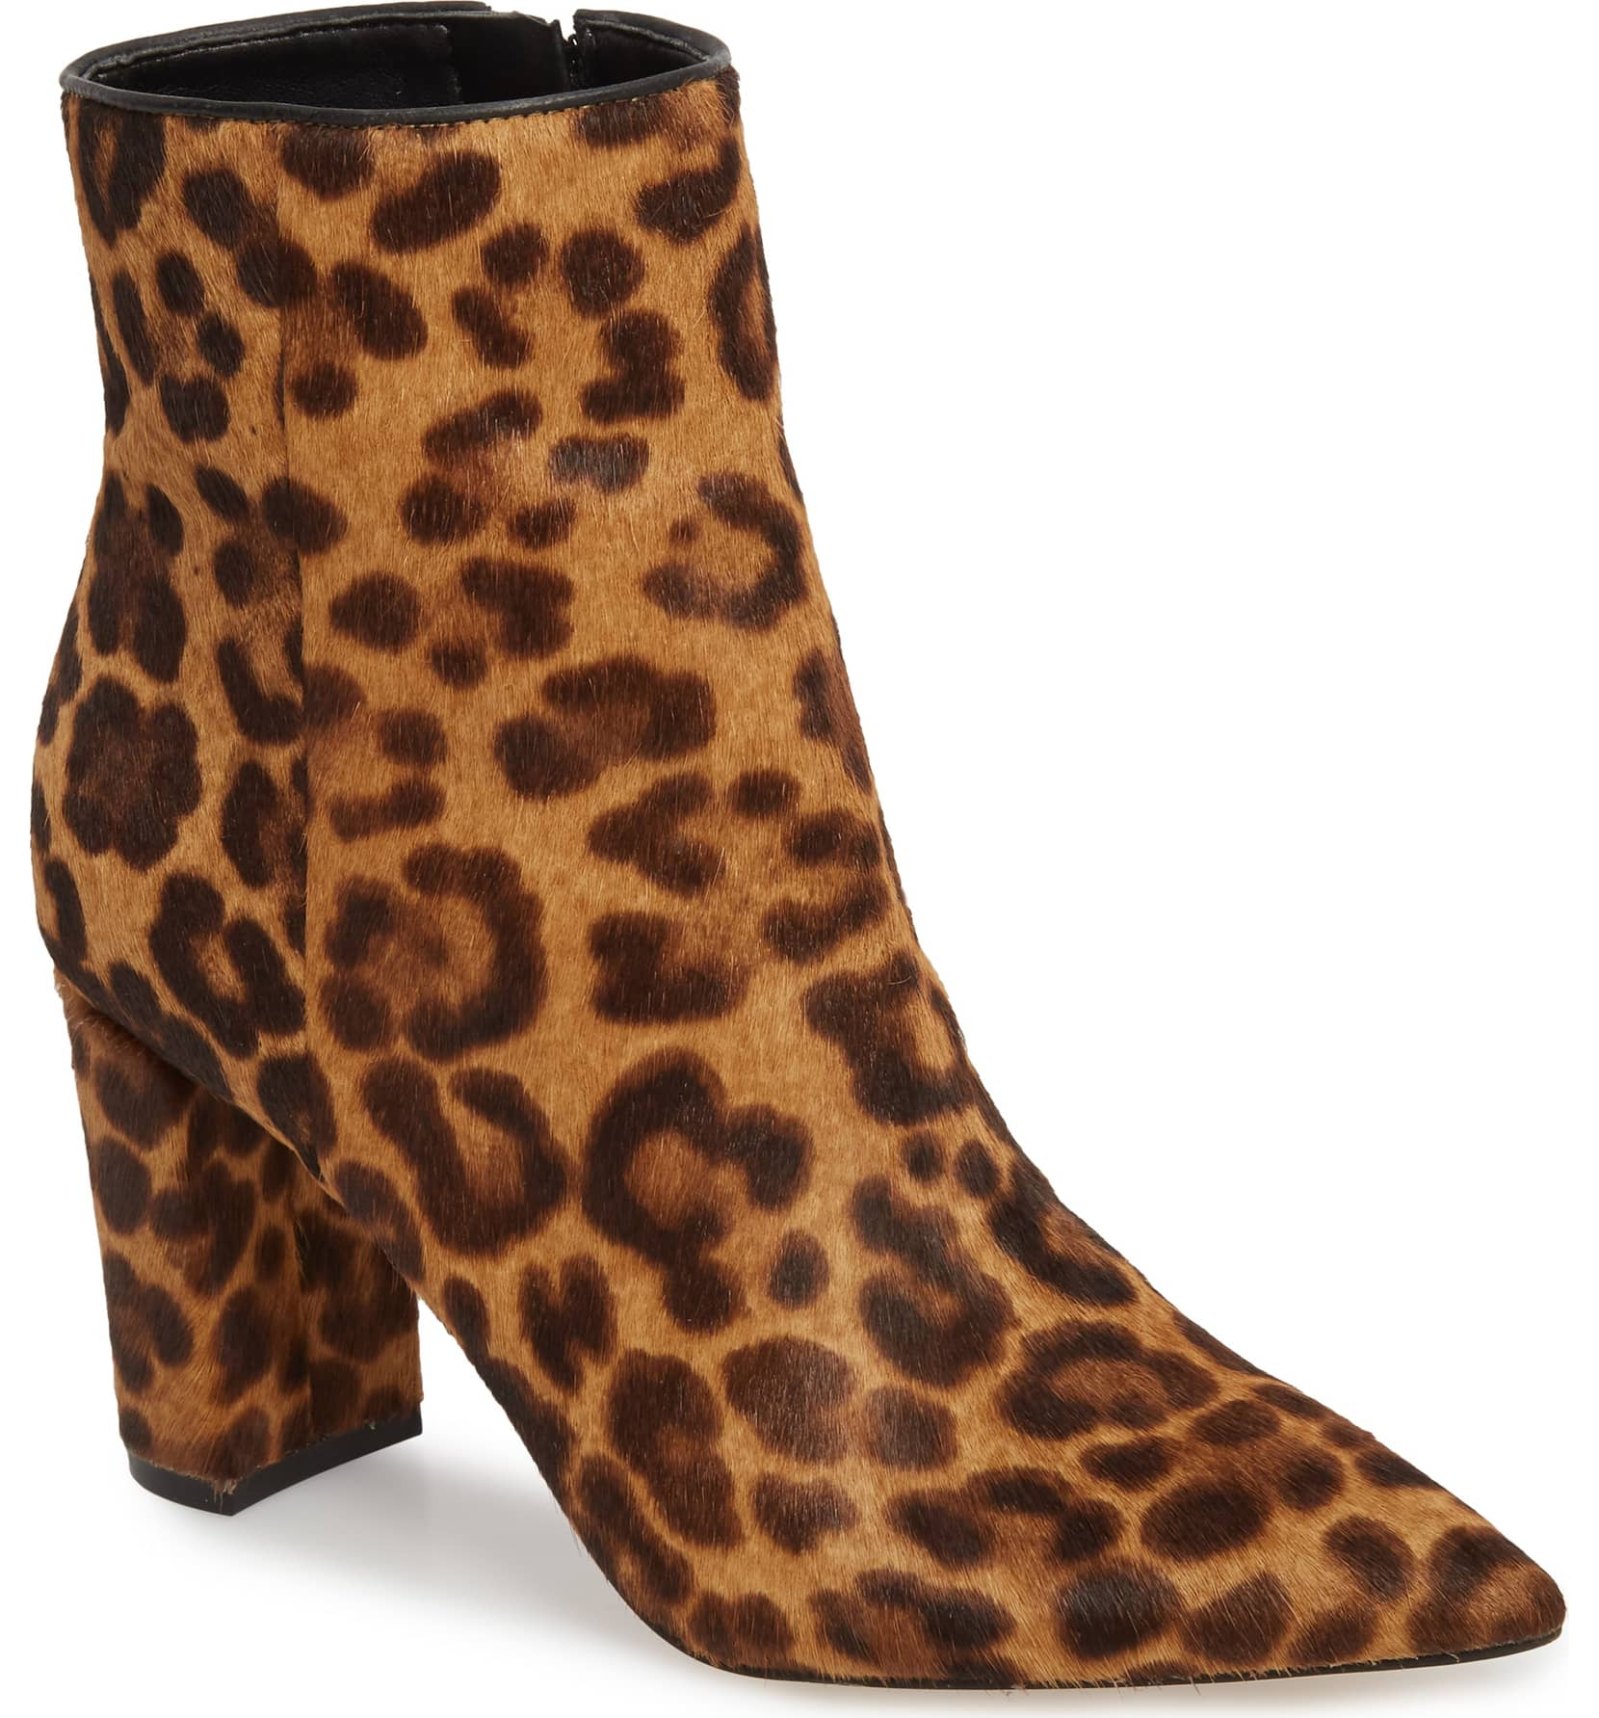 Shop These Leopard Booties for a Wild Fashion Statement | Us Weekly